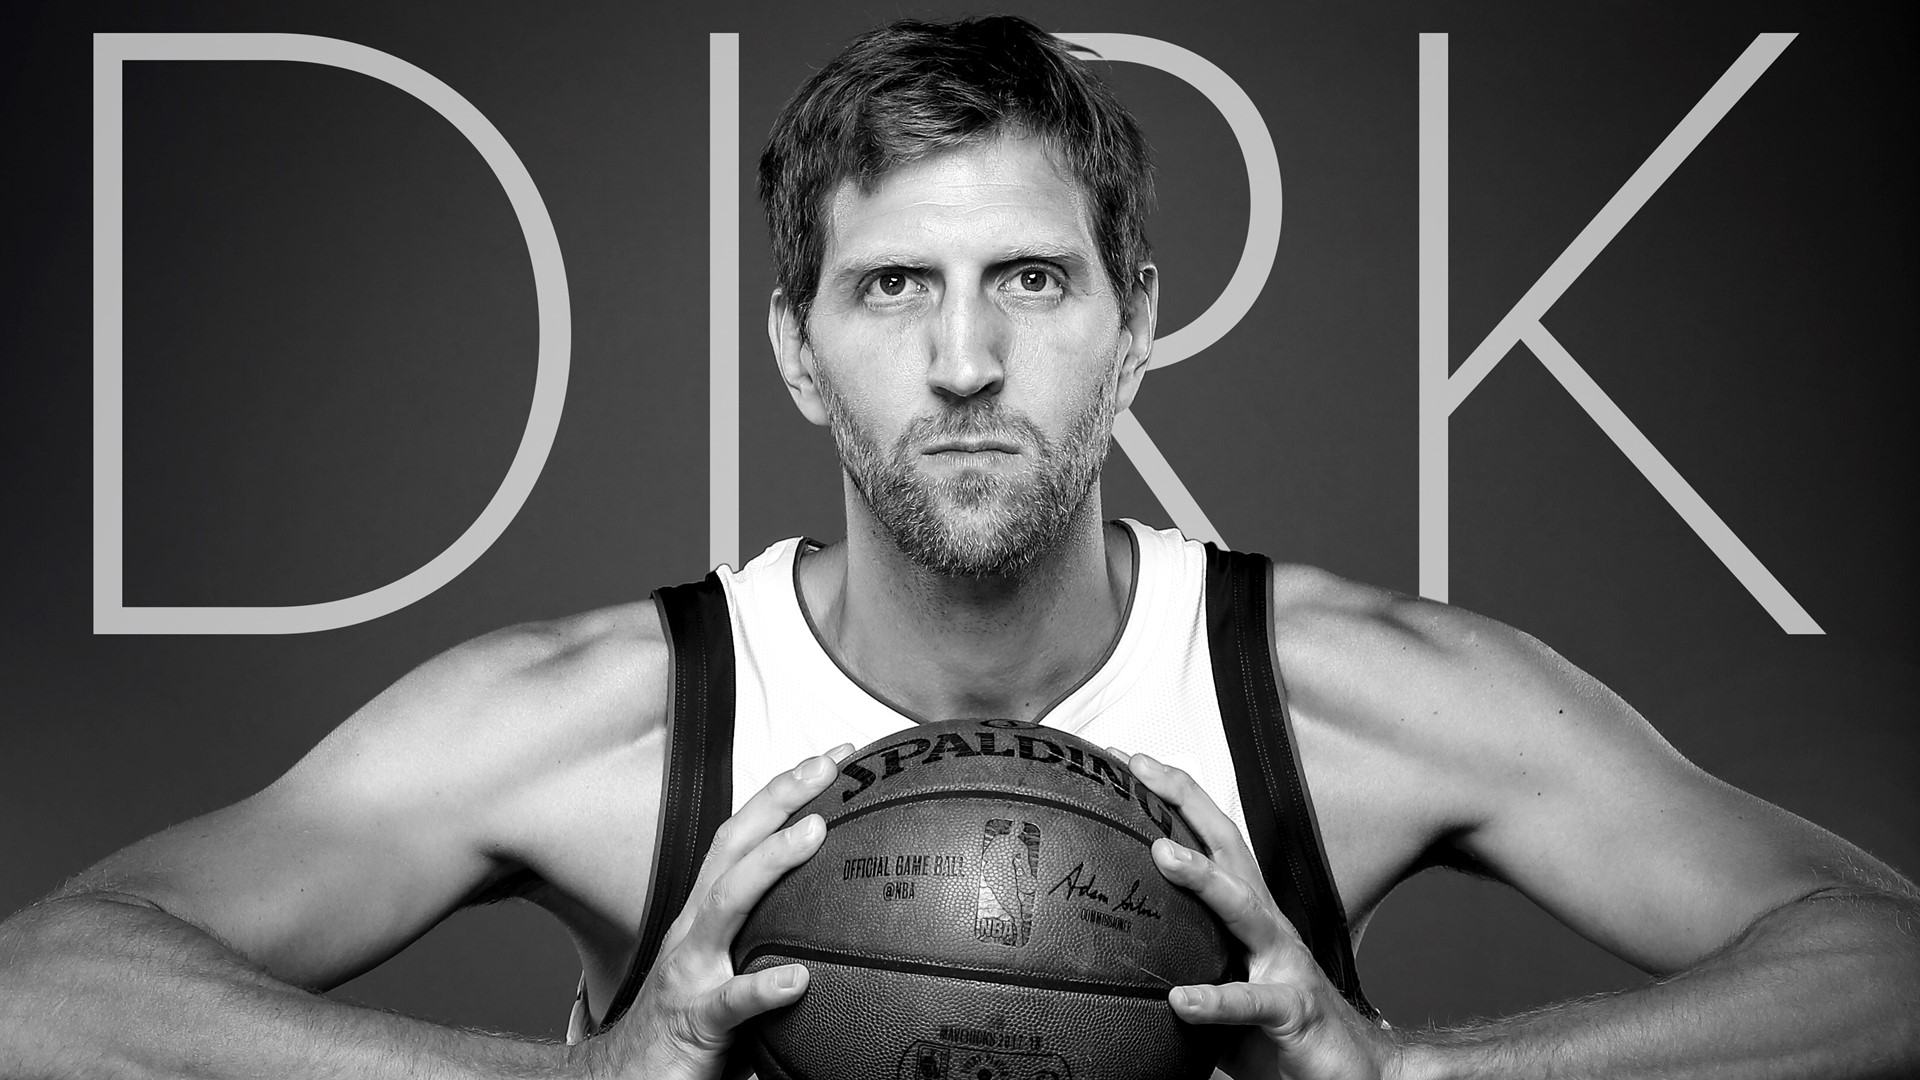 What will you miss the most about Dirk if he decides to hag it up after this season?